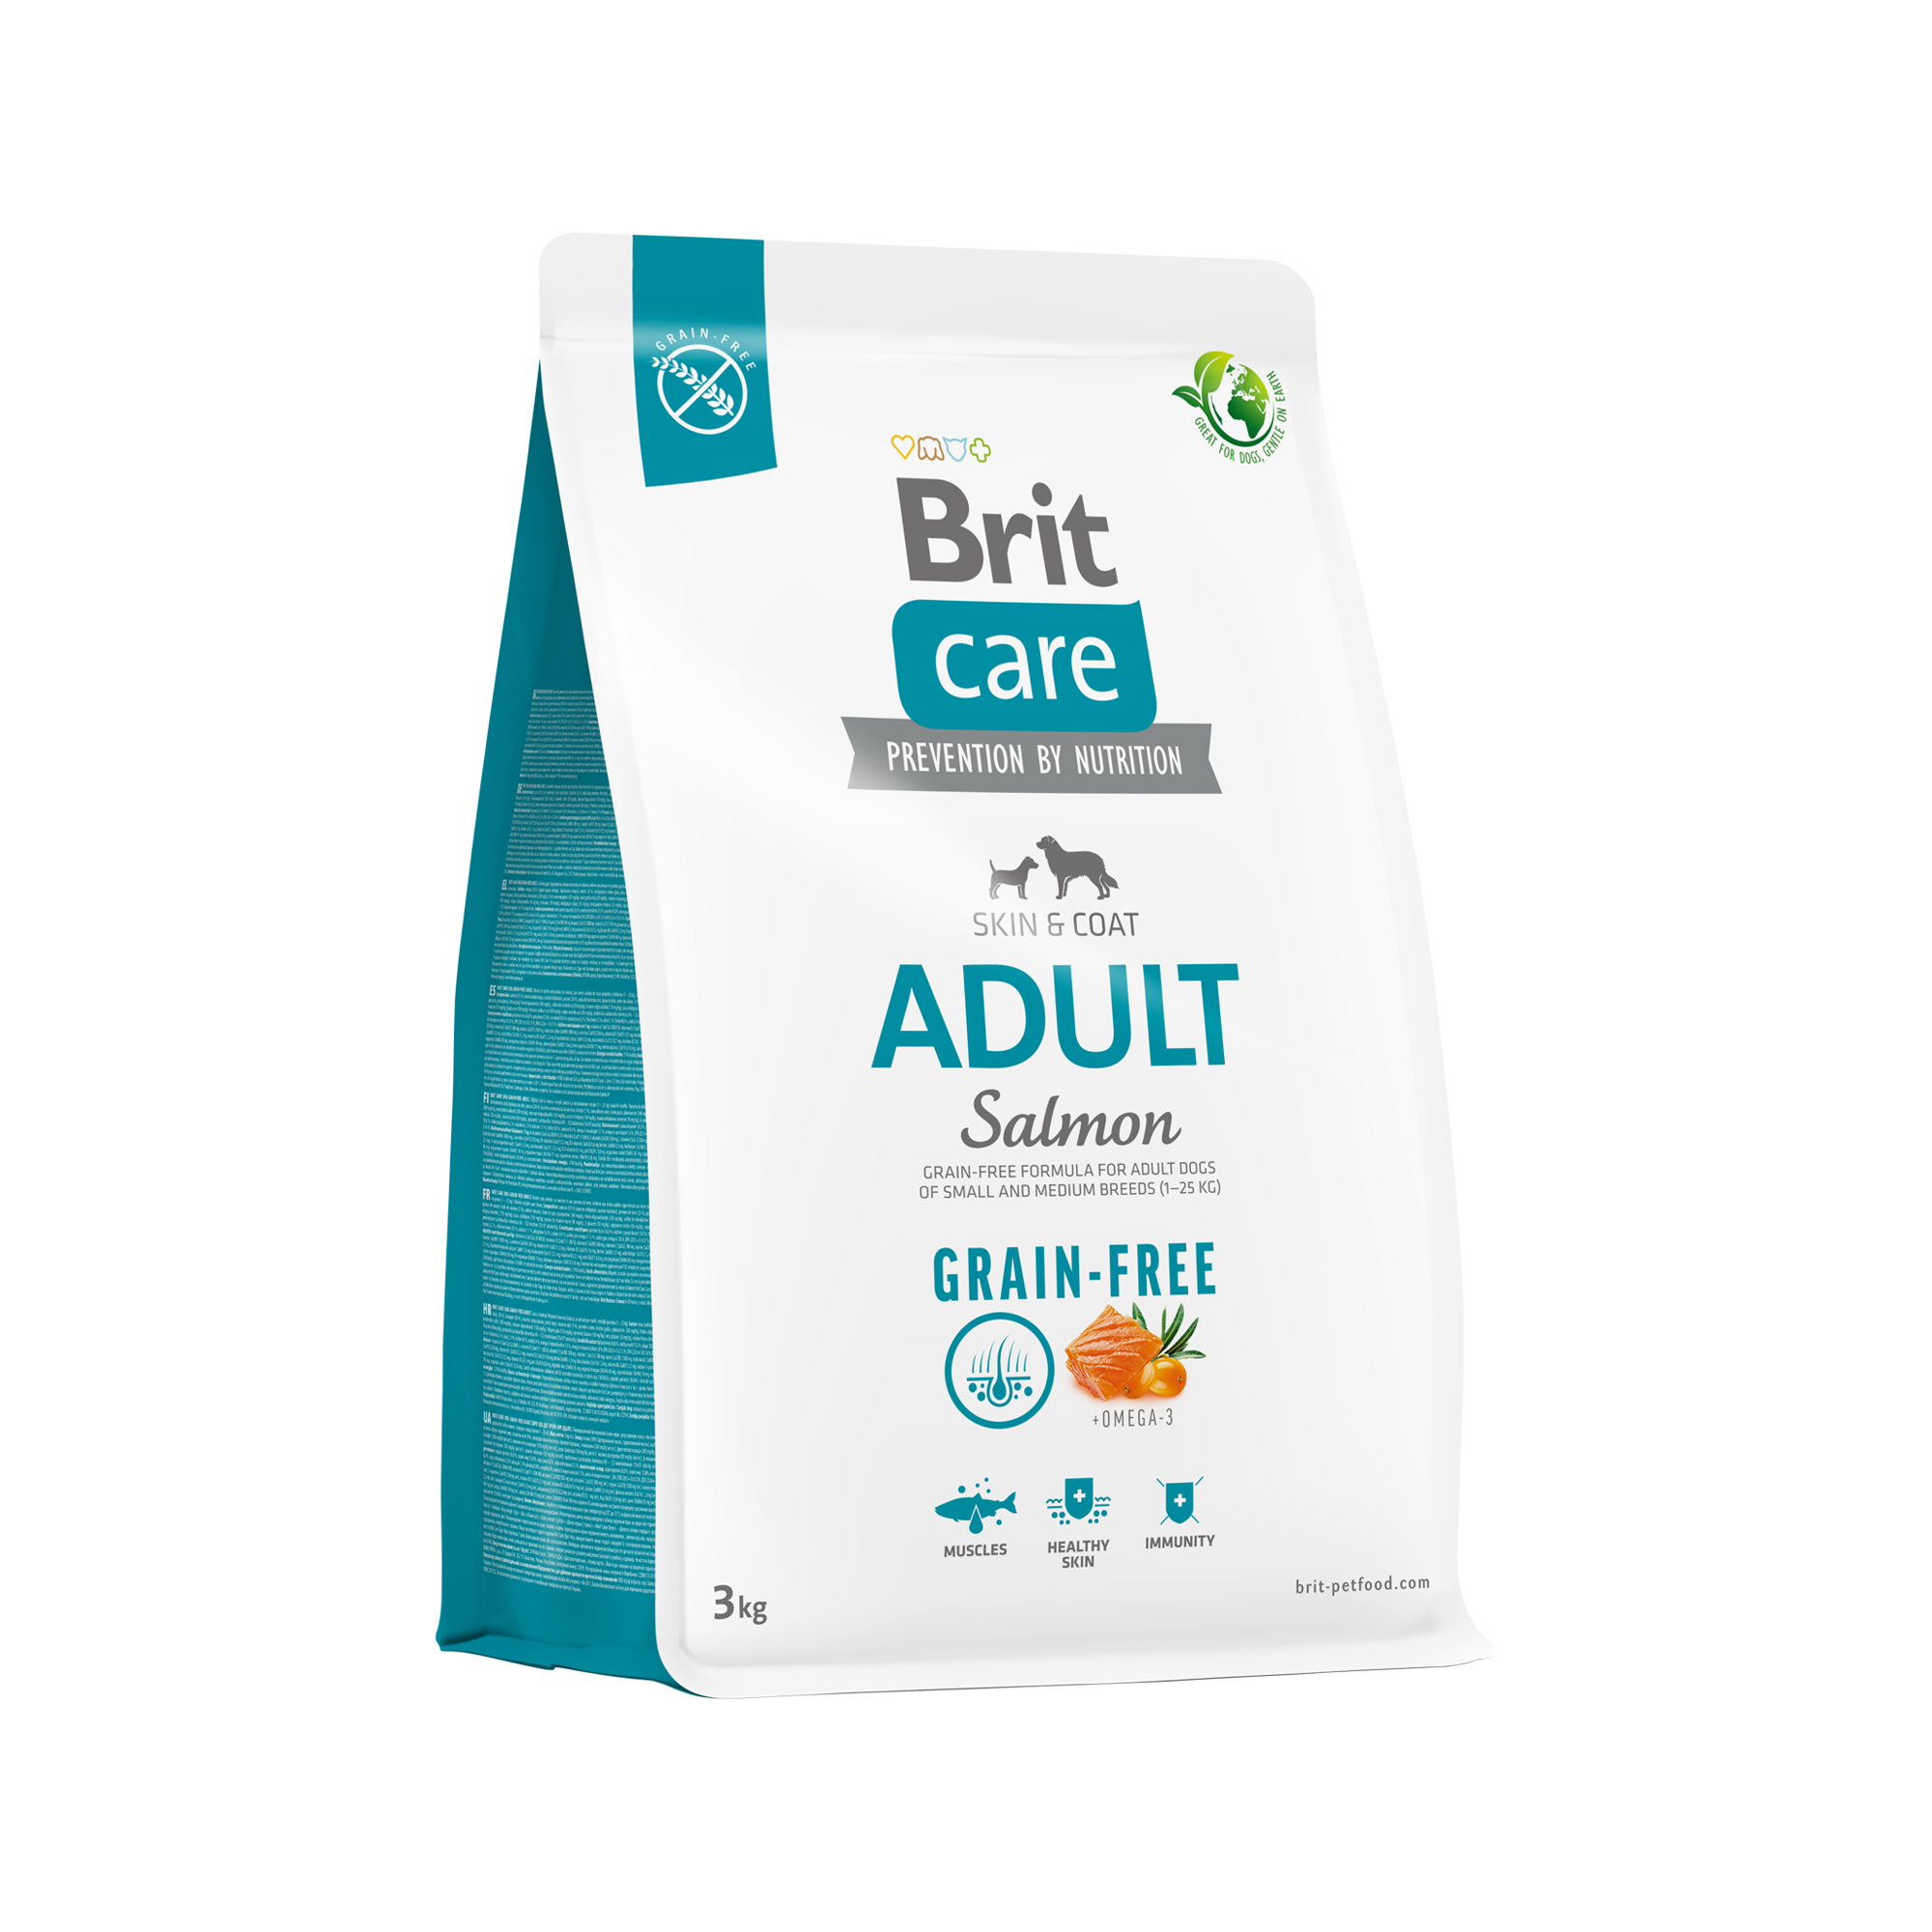 Brit Dry food for adult dogs small and medium breeds Care Grain-free Adult Salmon- 12 kg